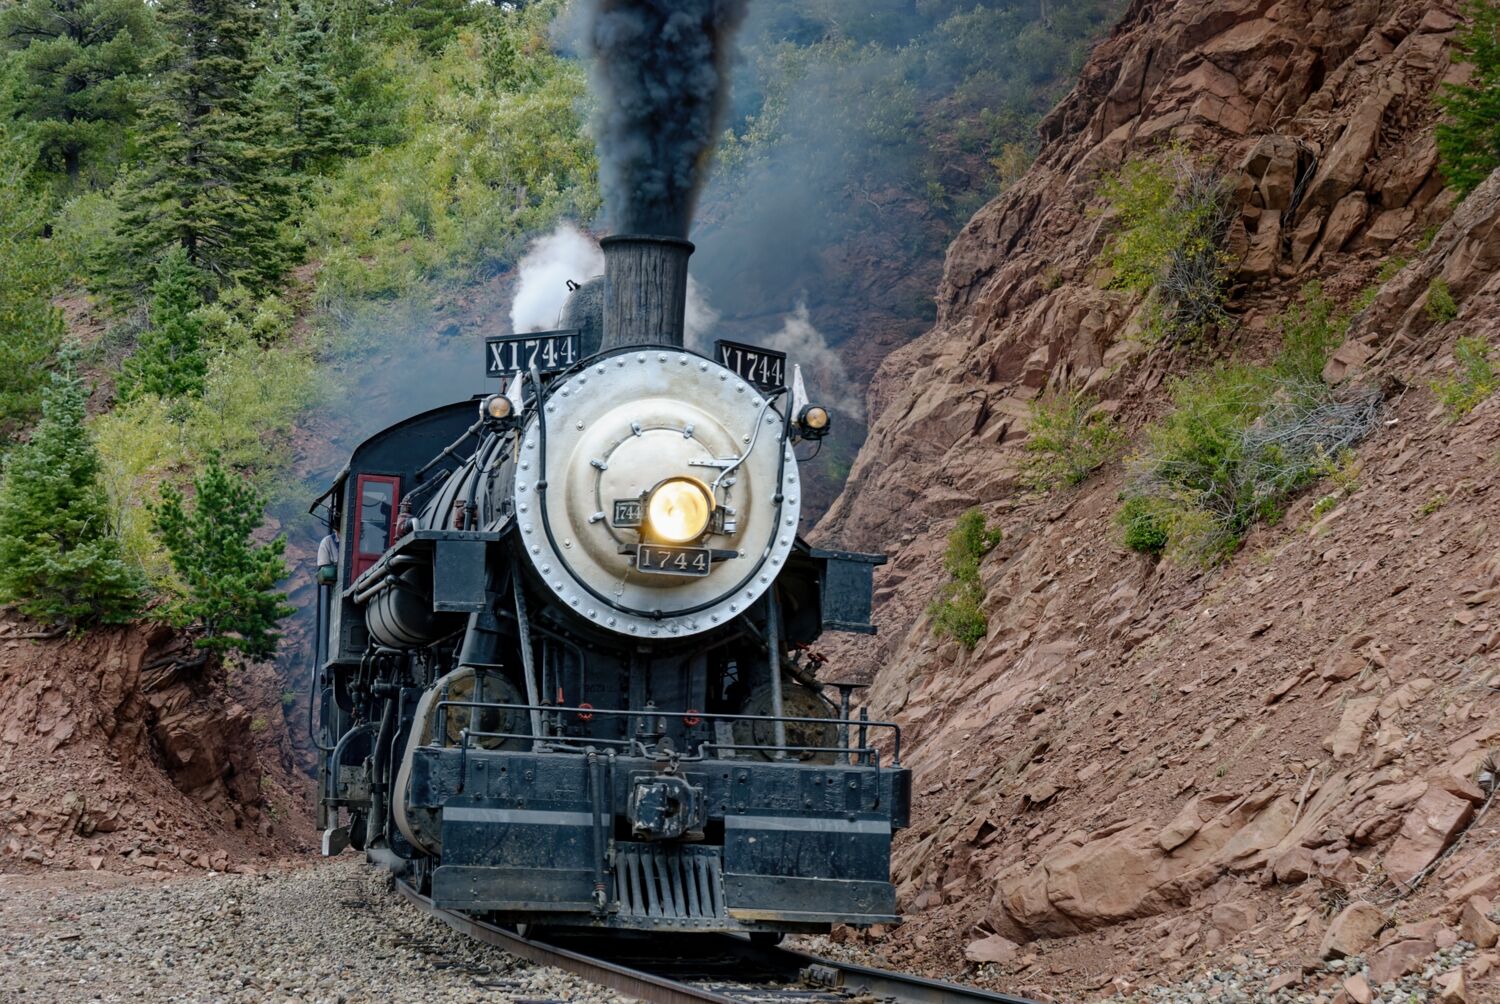 1744 finally sees some daylight at one of the tunnels on the Rio Grande Scenic Railroad in Colorado.